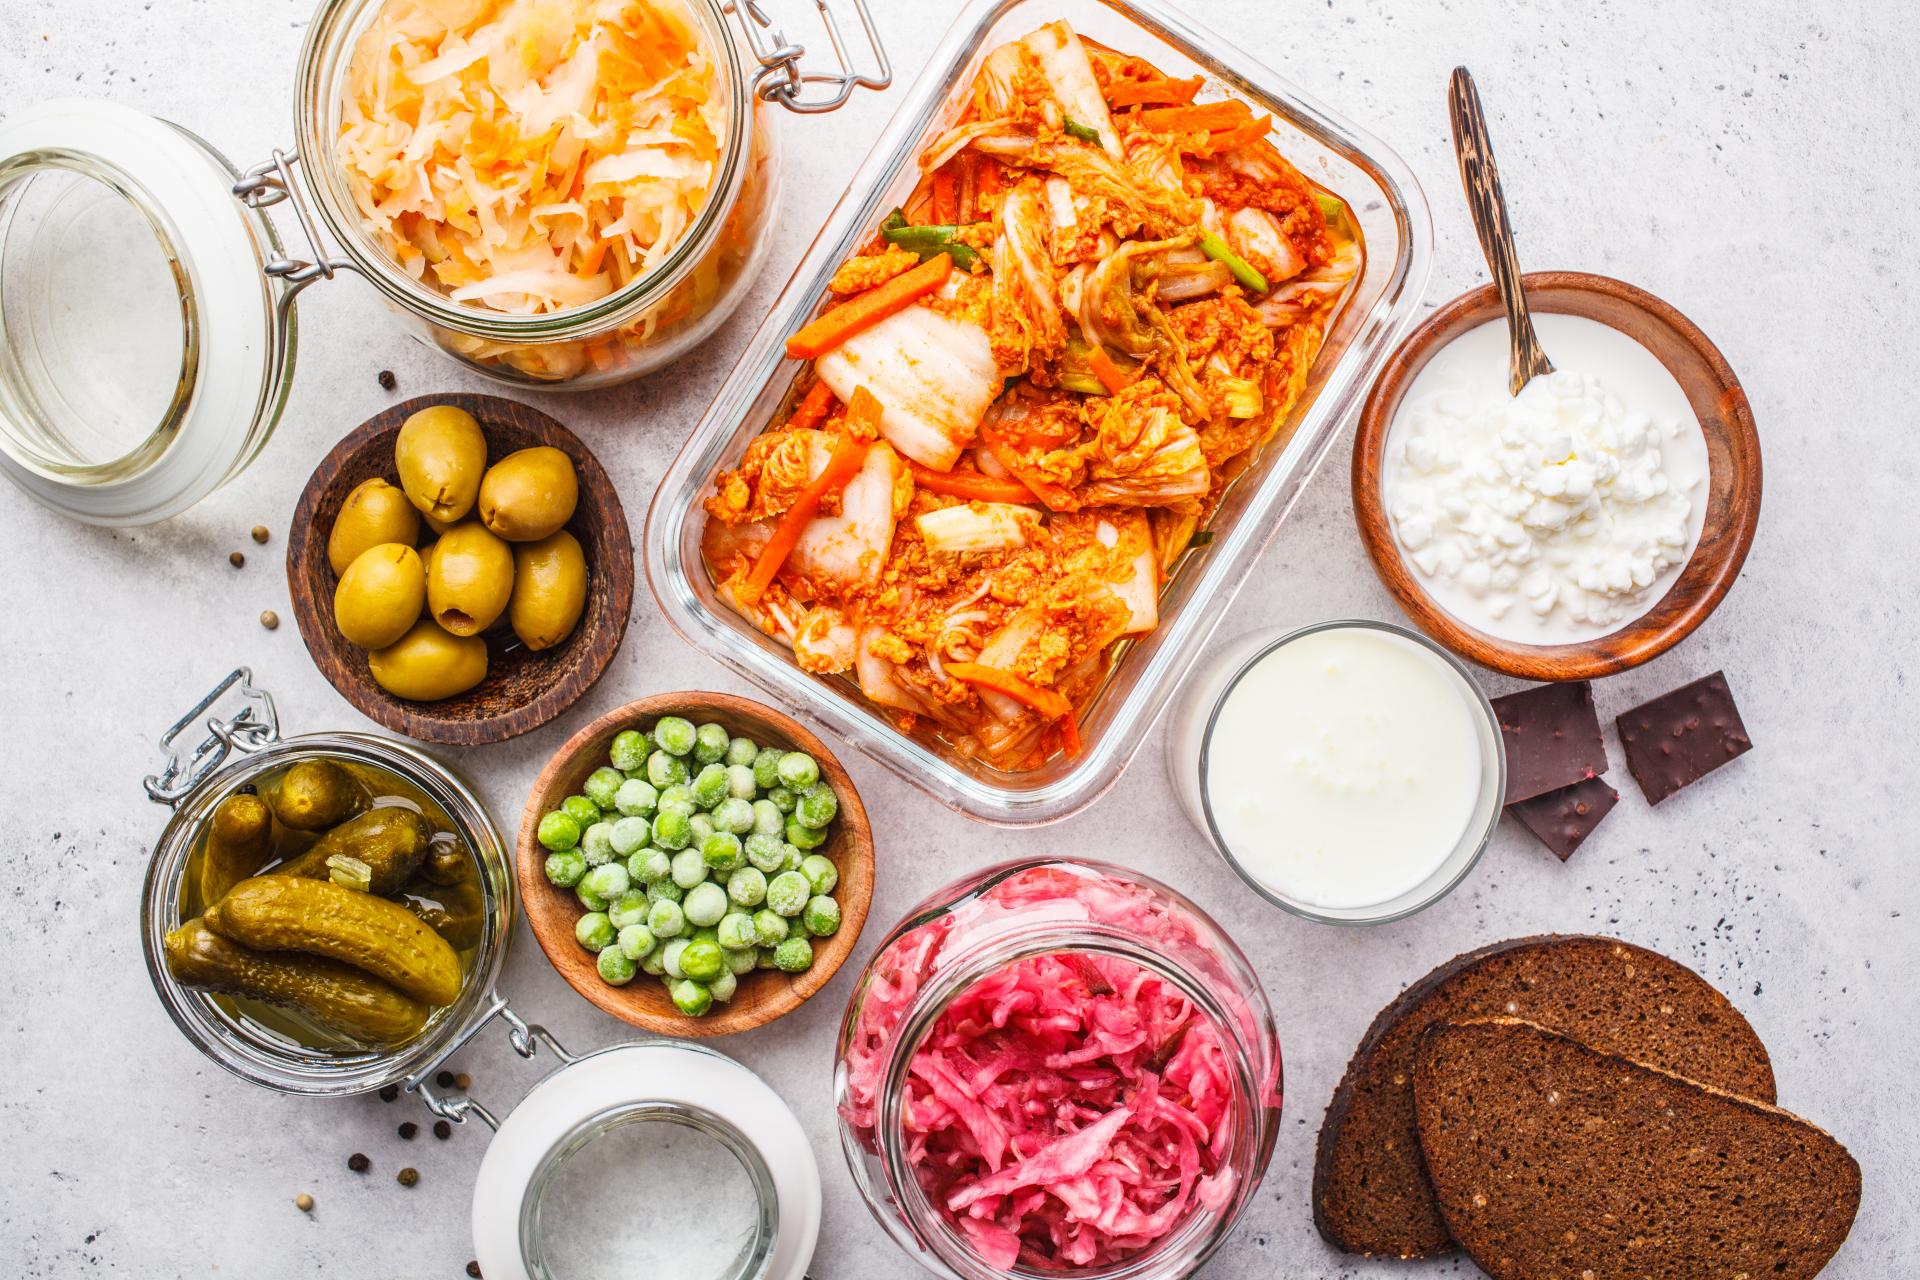 12 Delicious Fermented Foods Good for Digestive Health